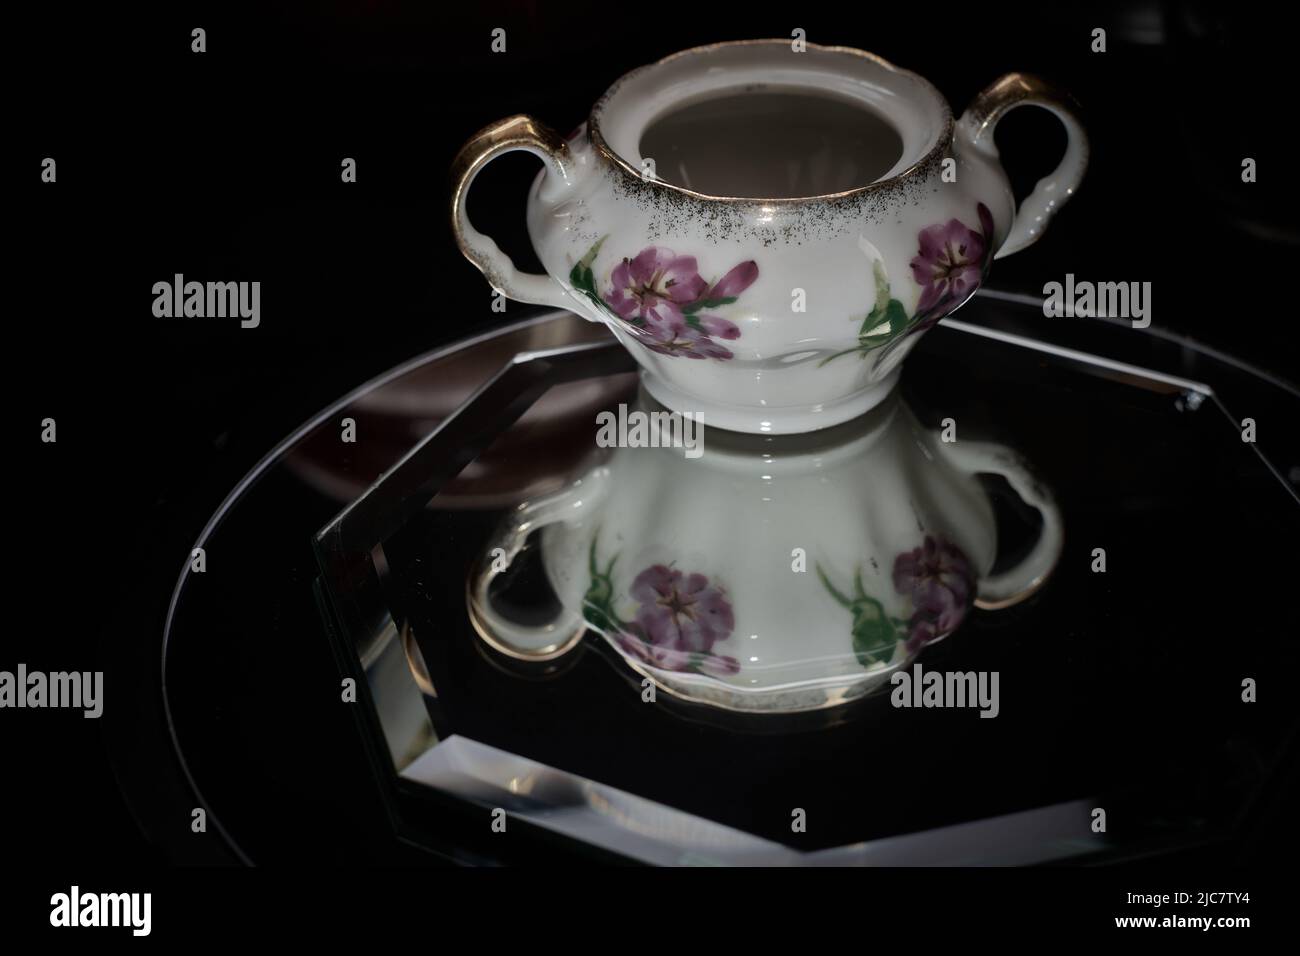 Transparent Modern 6 Pcs Crystal Clear Bubble Design Glass Tea Cup & Saucer  Set, For Home,Hotel